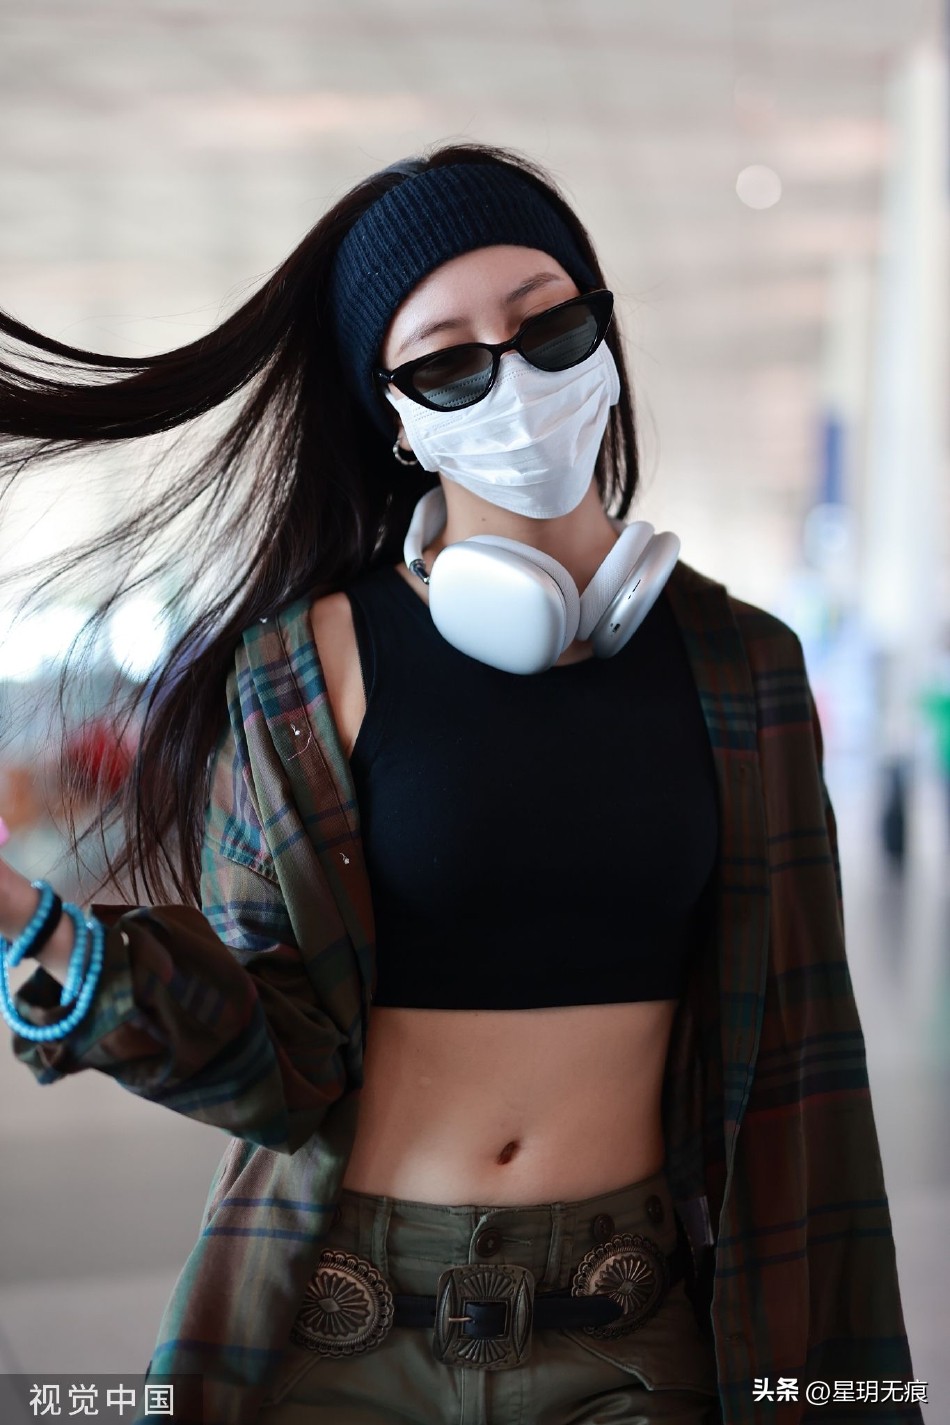 Song Yanfei showed up at the airport in a navel-baring outfit and ...